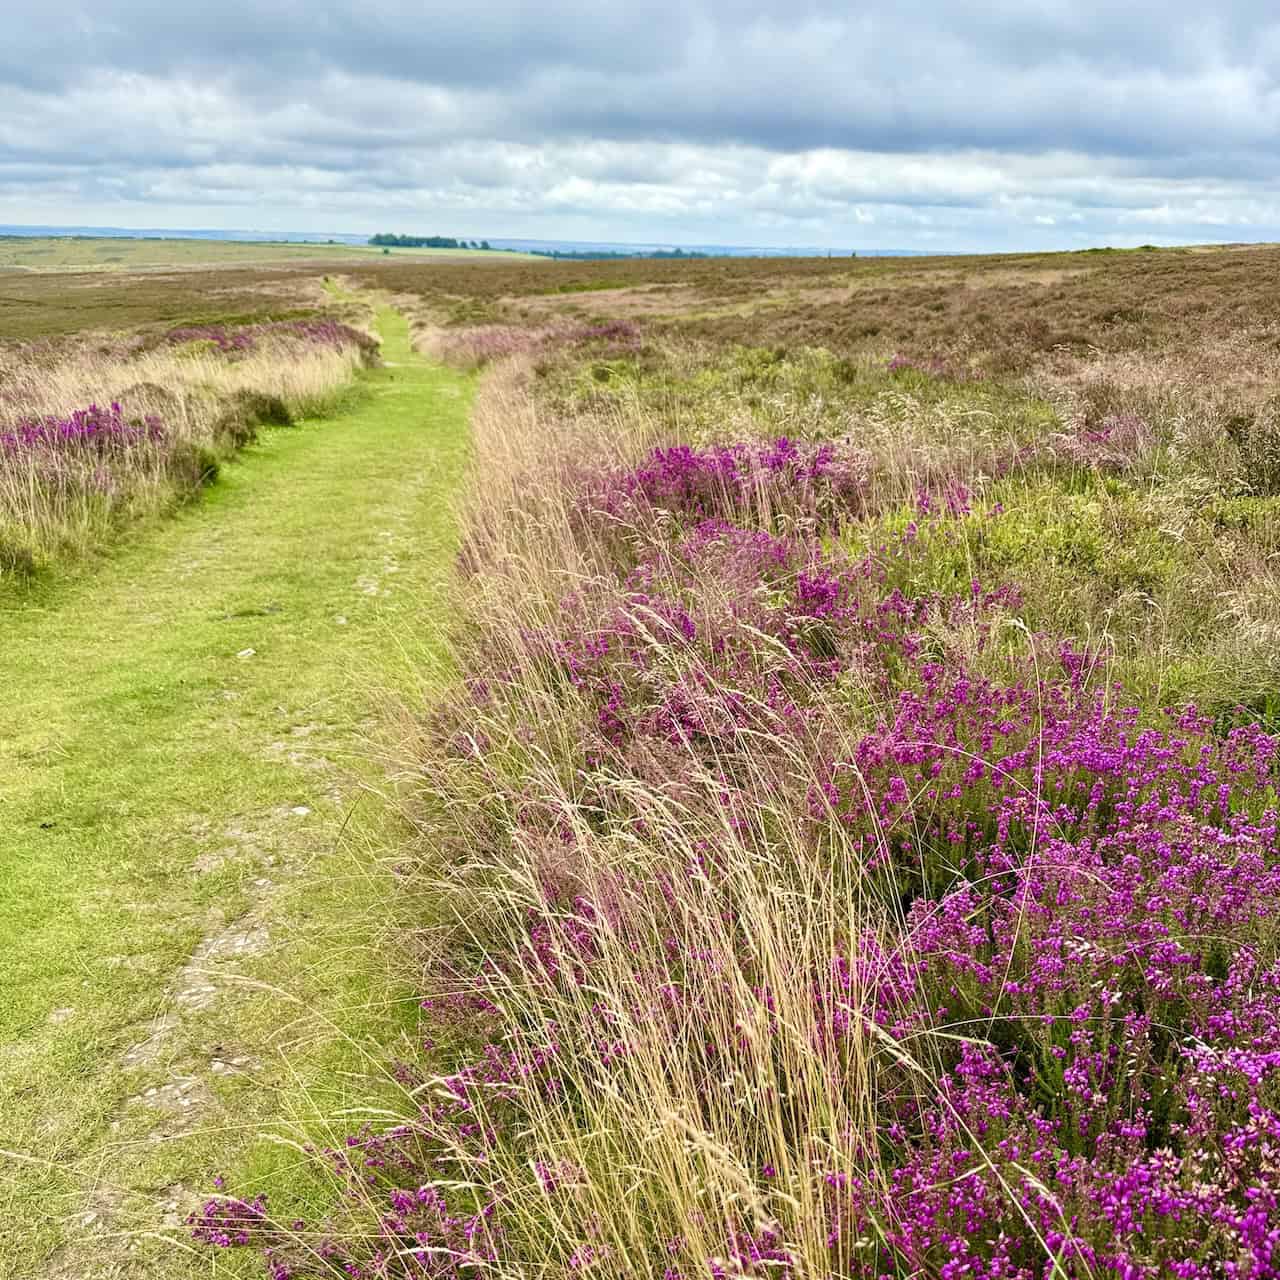 Tabular Hills Walk skirting around the northern and western upper rim of the Hole of Horcum, with the bridleway crossing Levisham Moor and bordered by heather moorland.